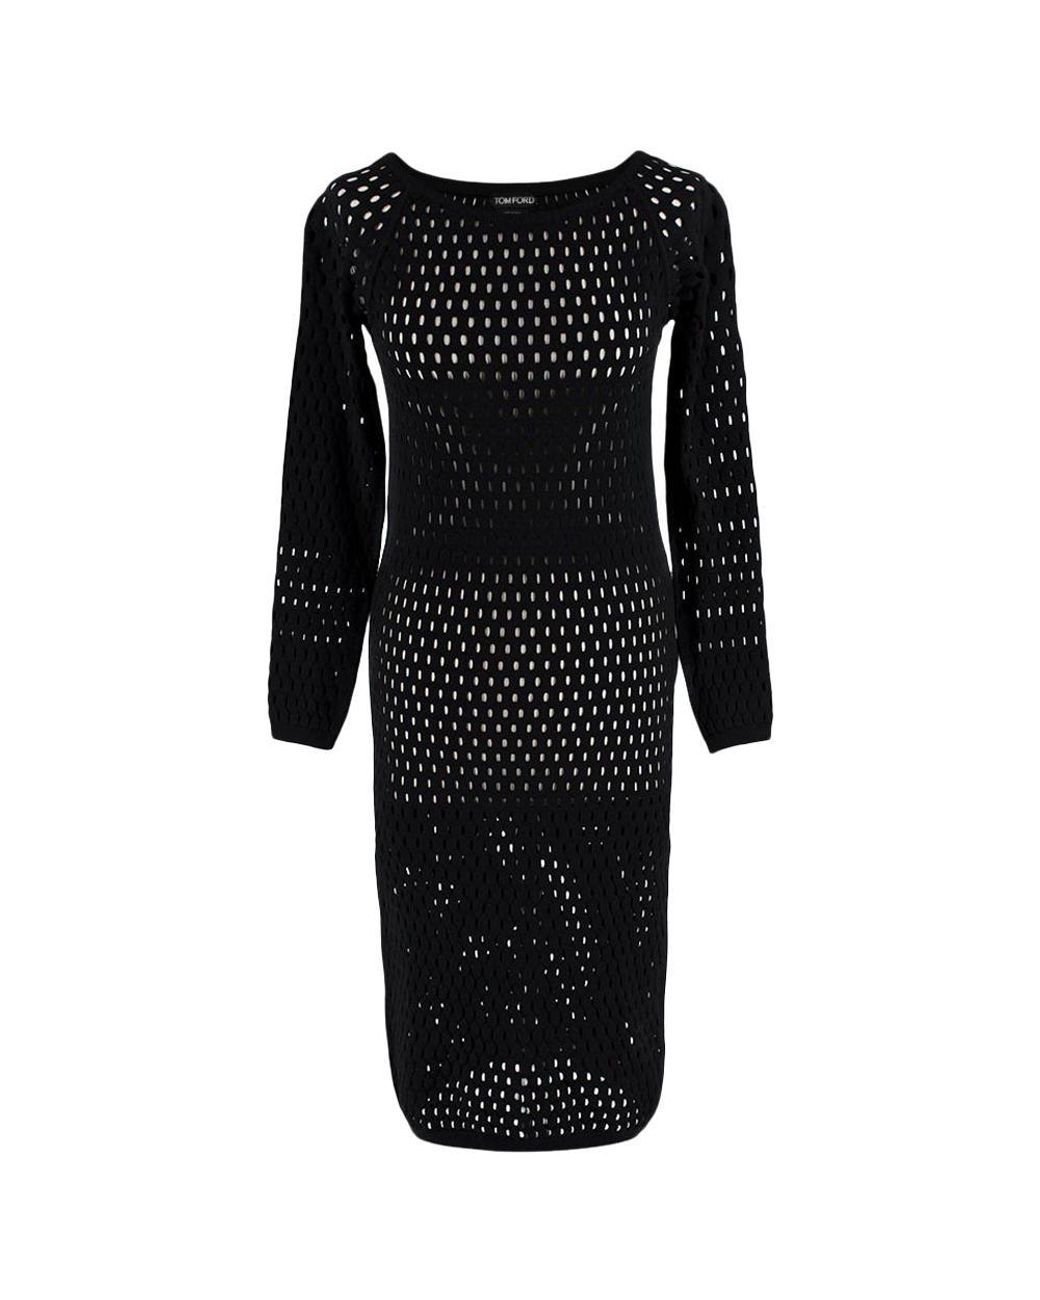 Tom Ford Synthetic Fishnet Long Sleeve Dress - Size S in Black - Lyst